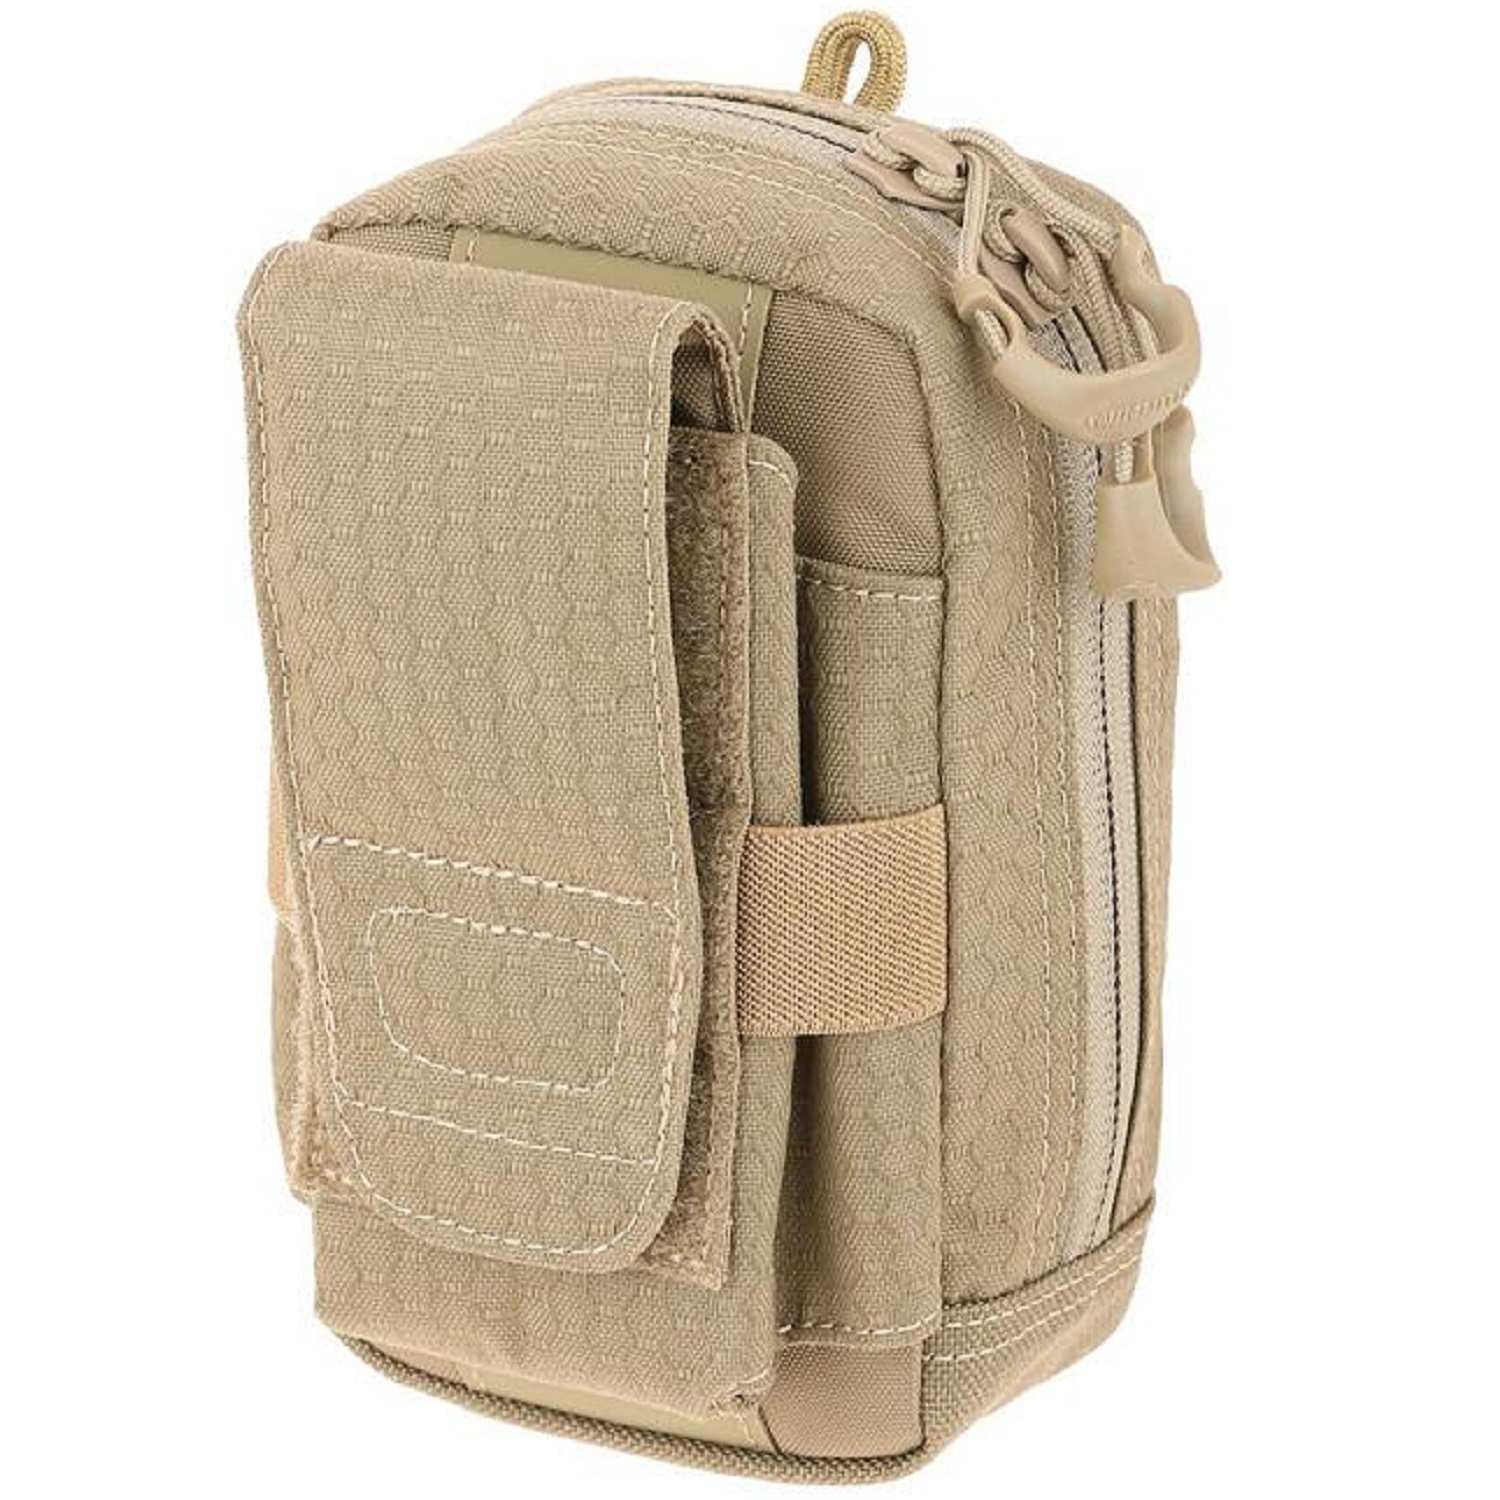 Maxpedition PUP Phone Utility Pouch Tan – Hiking Survival